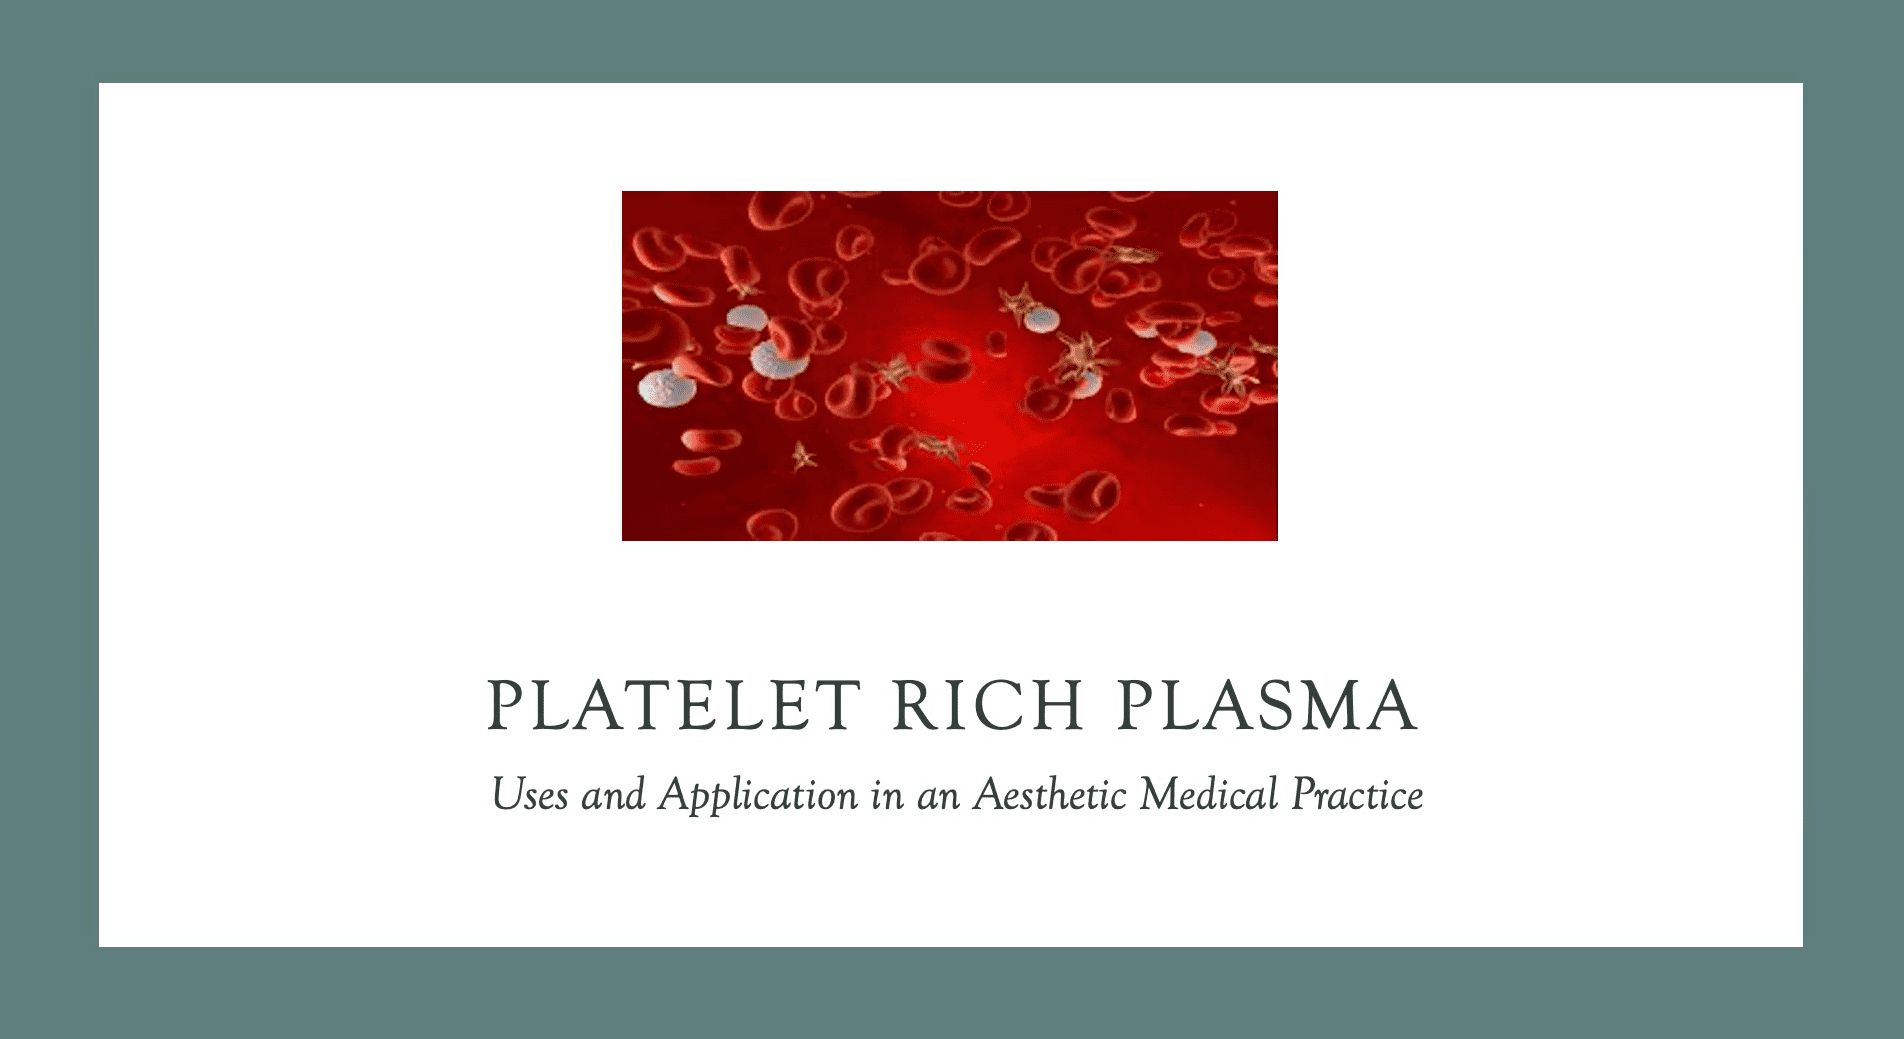 Platelet Rich Plasma; Uses and Applications in an Aesthetic Medicine Practice